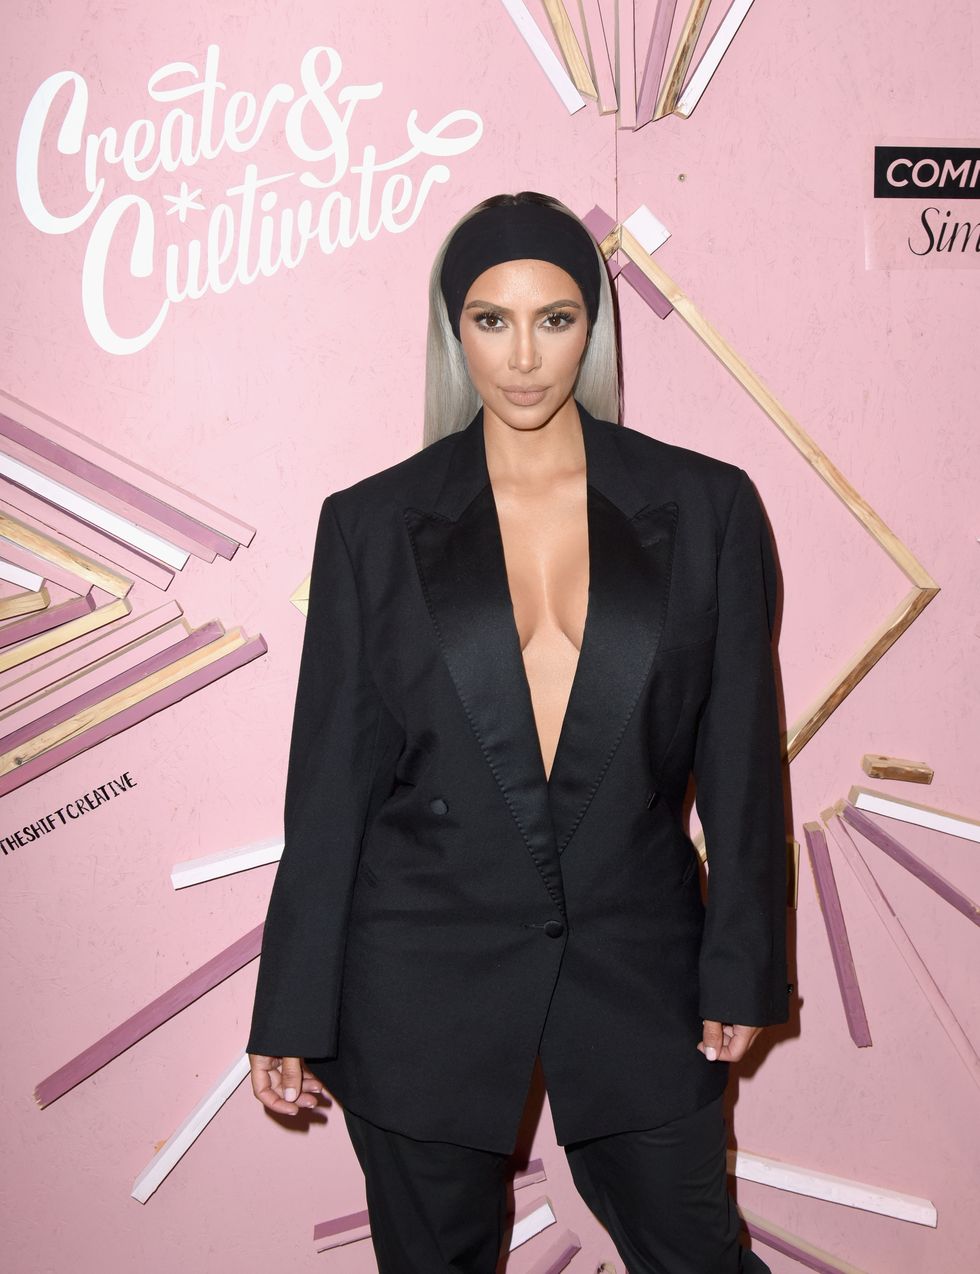 Kim Kardashian reveals the worst part about being her 